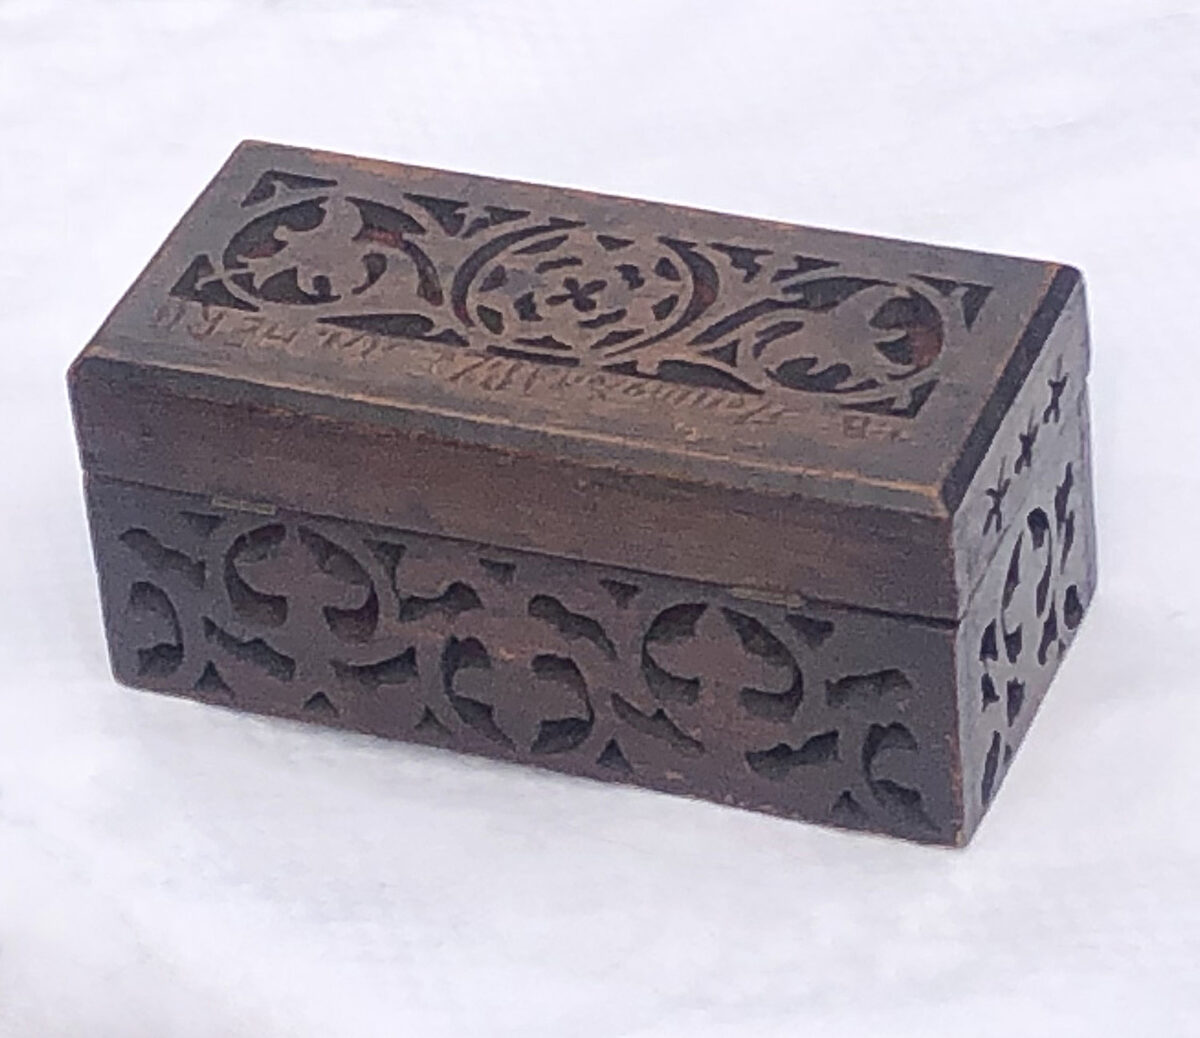 Ditty box from HERO's 1820 voyage